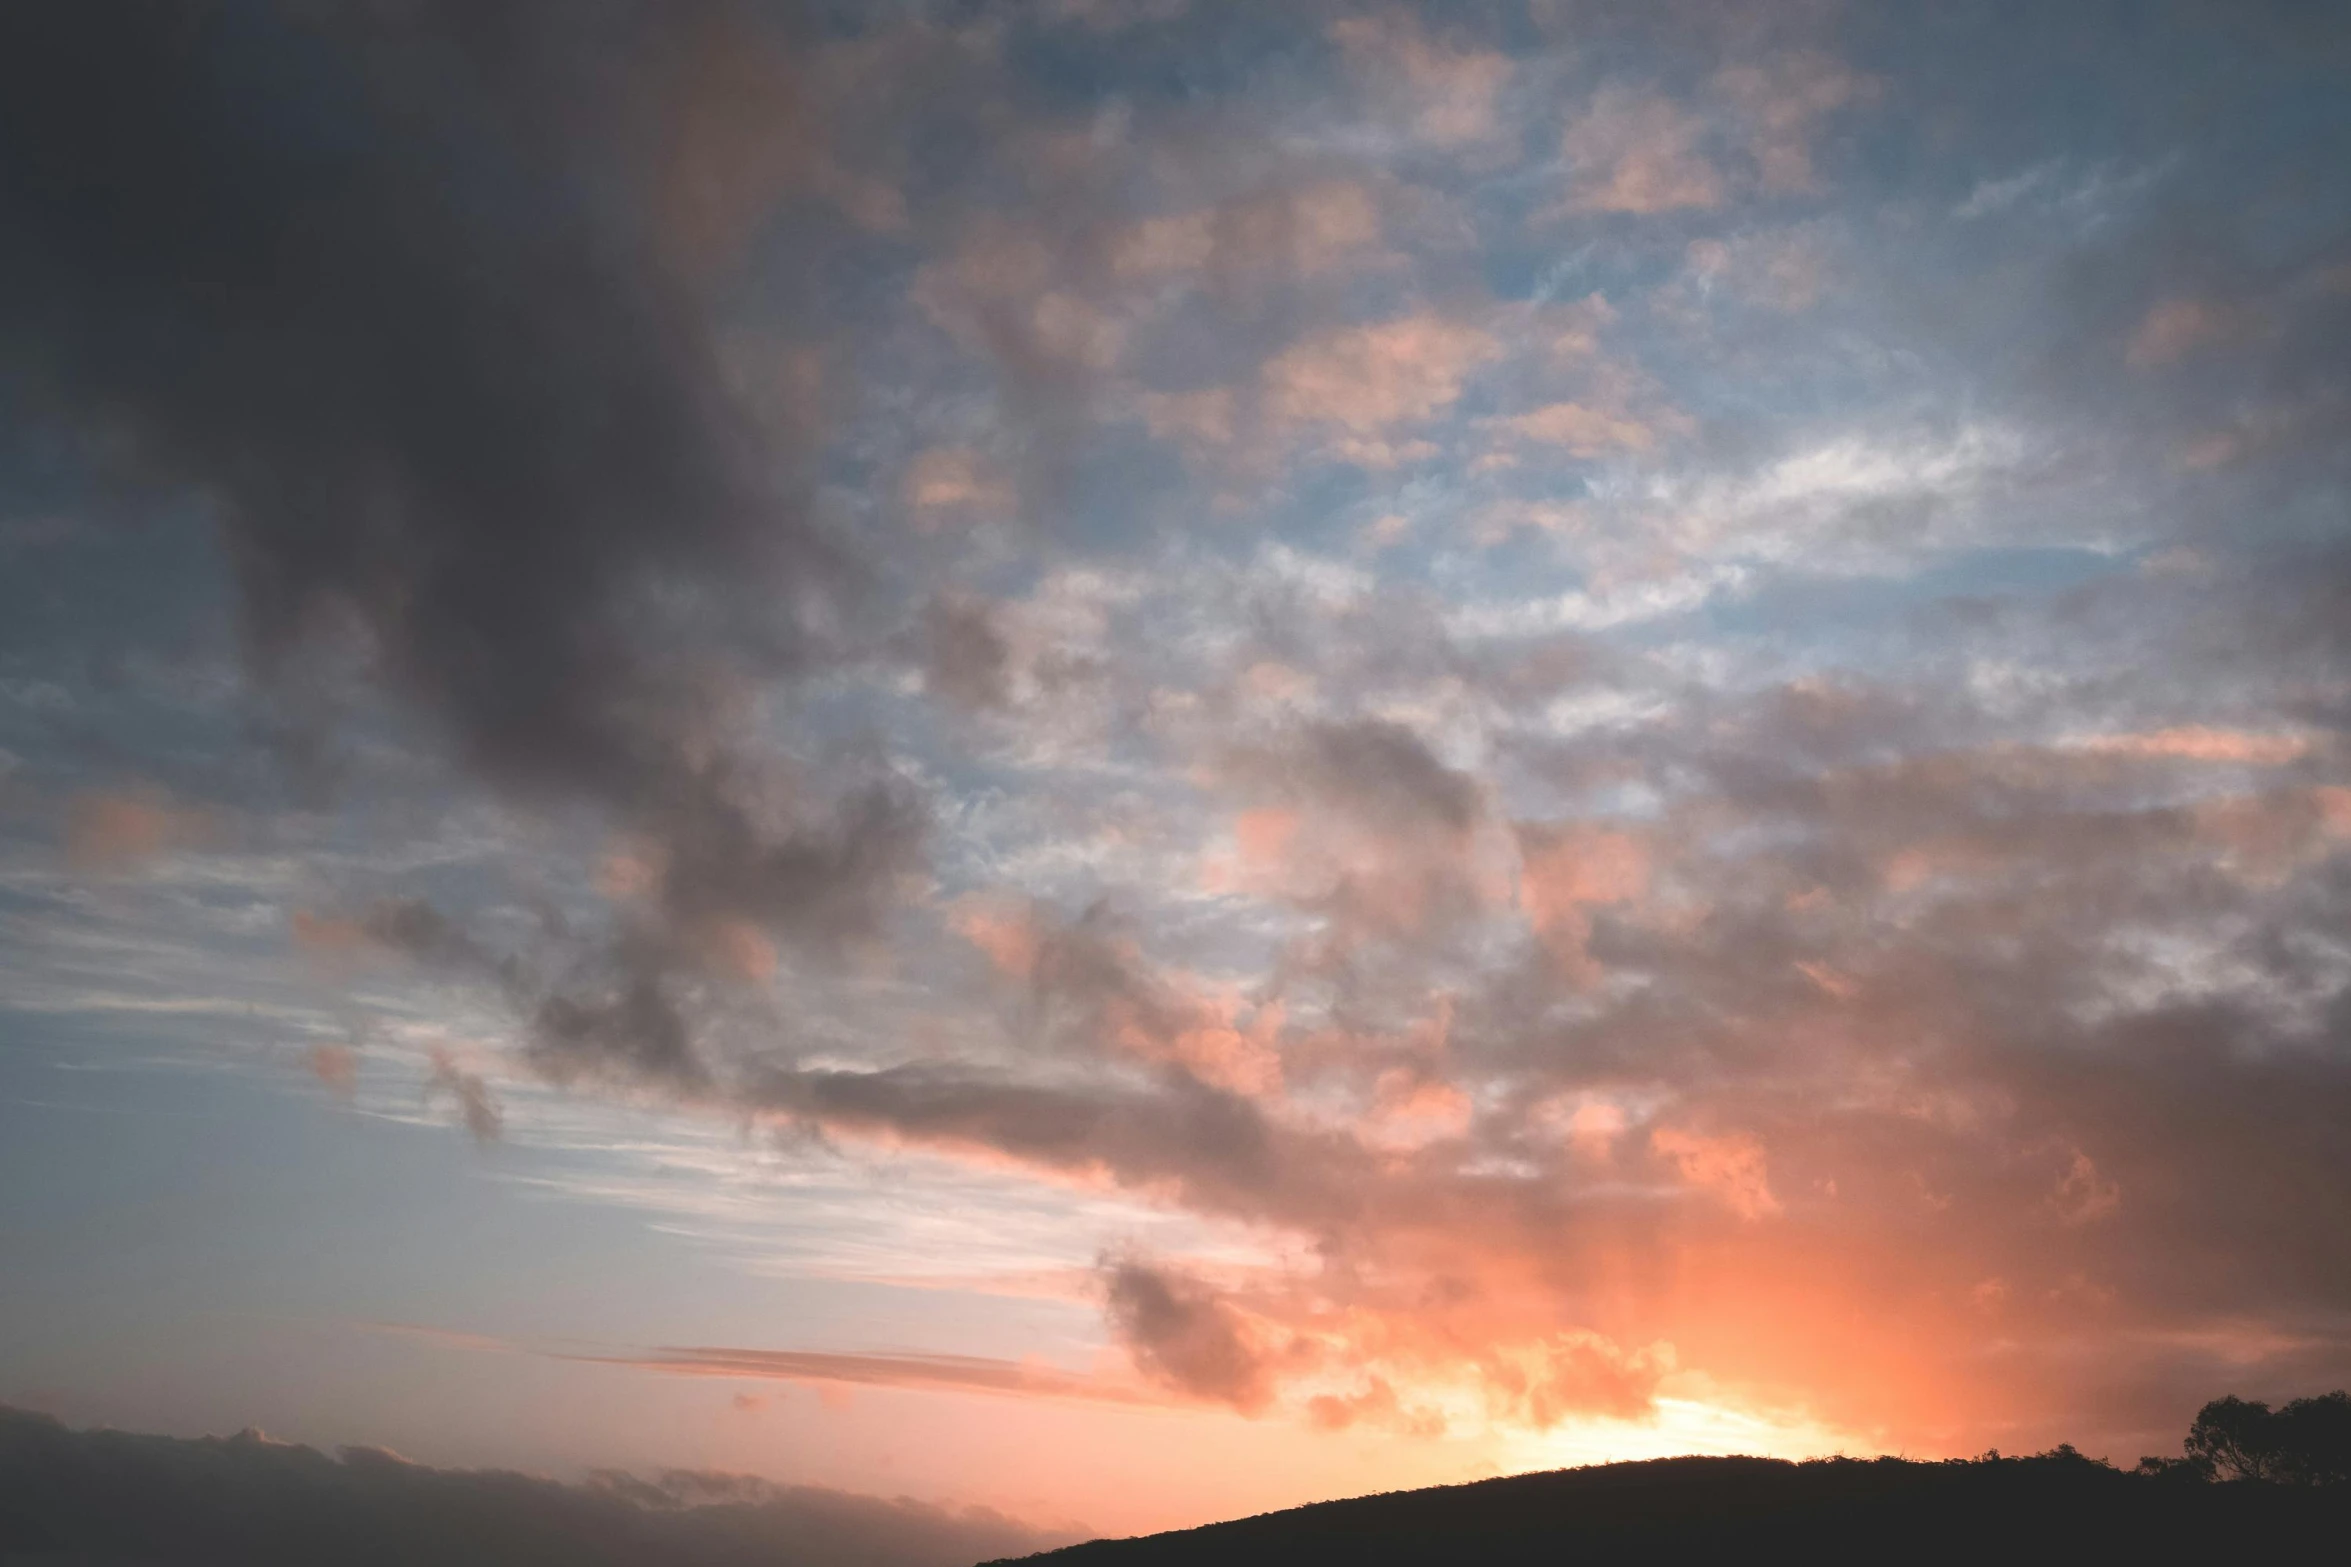 a couple of cows standing on top of a lush green field, by Julian Hatton, unsplash, romanticism, hazy sunset with dramatic clouds, over the hills, redpink sunset, timelapse